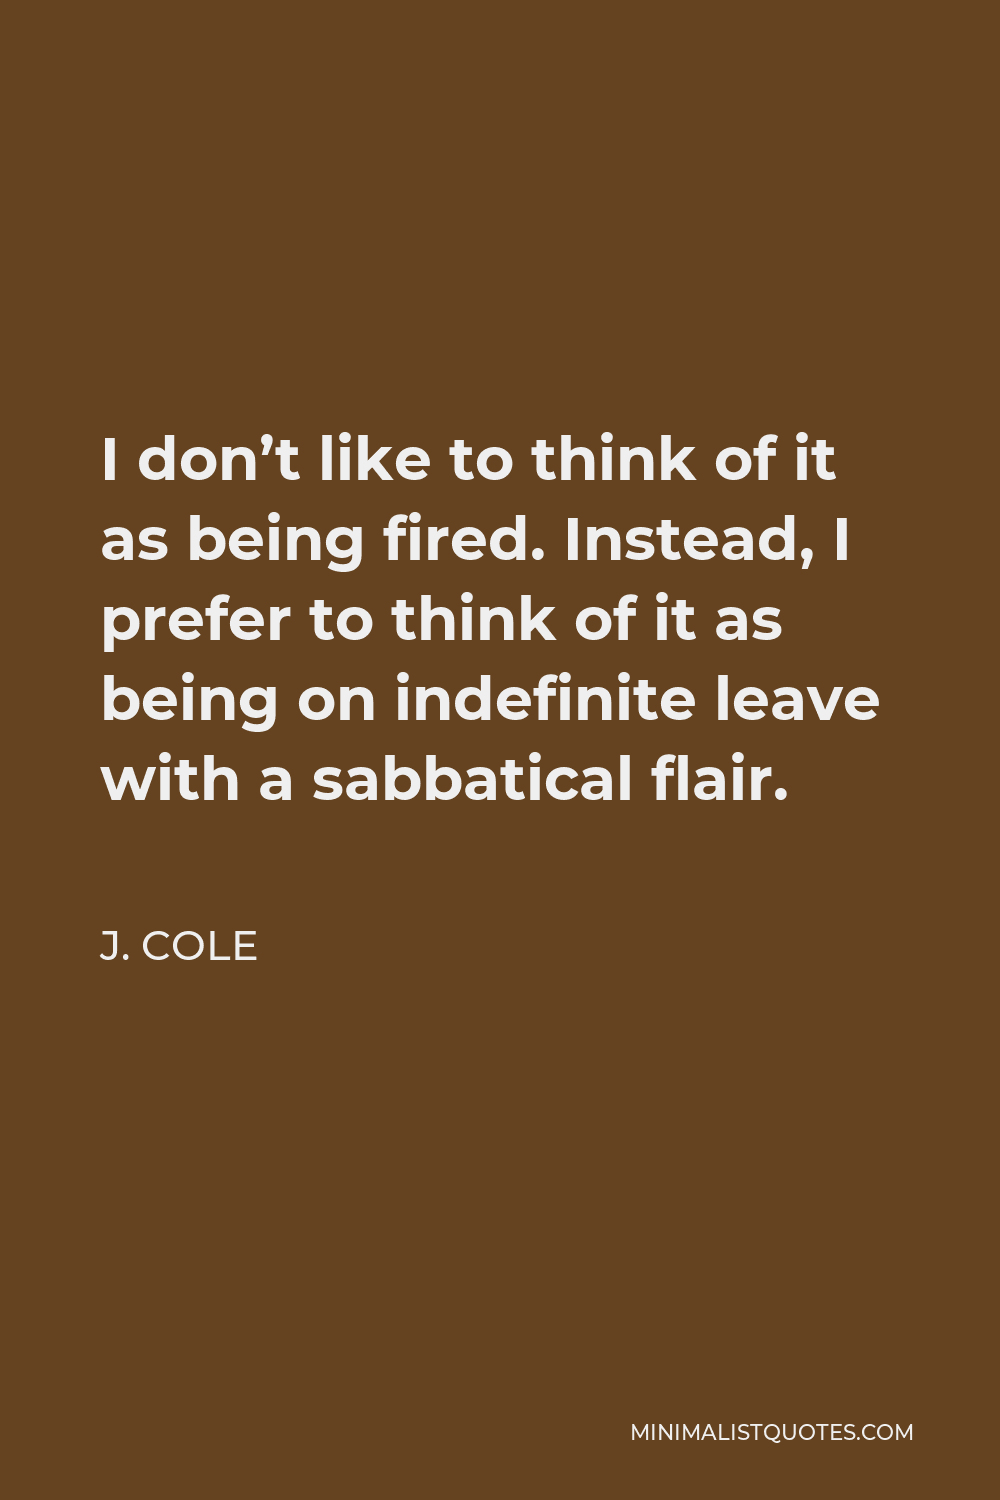 J. Cole Quote - I don’t like to think of it as being fired. Instead, I prefer to think of it as being on indefinite leave with a sabbatical flair.